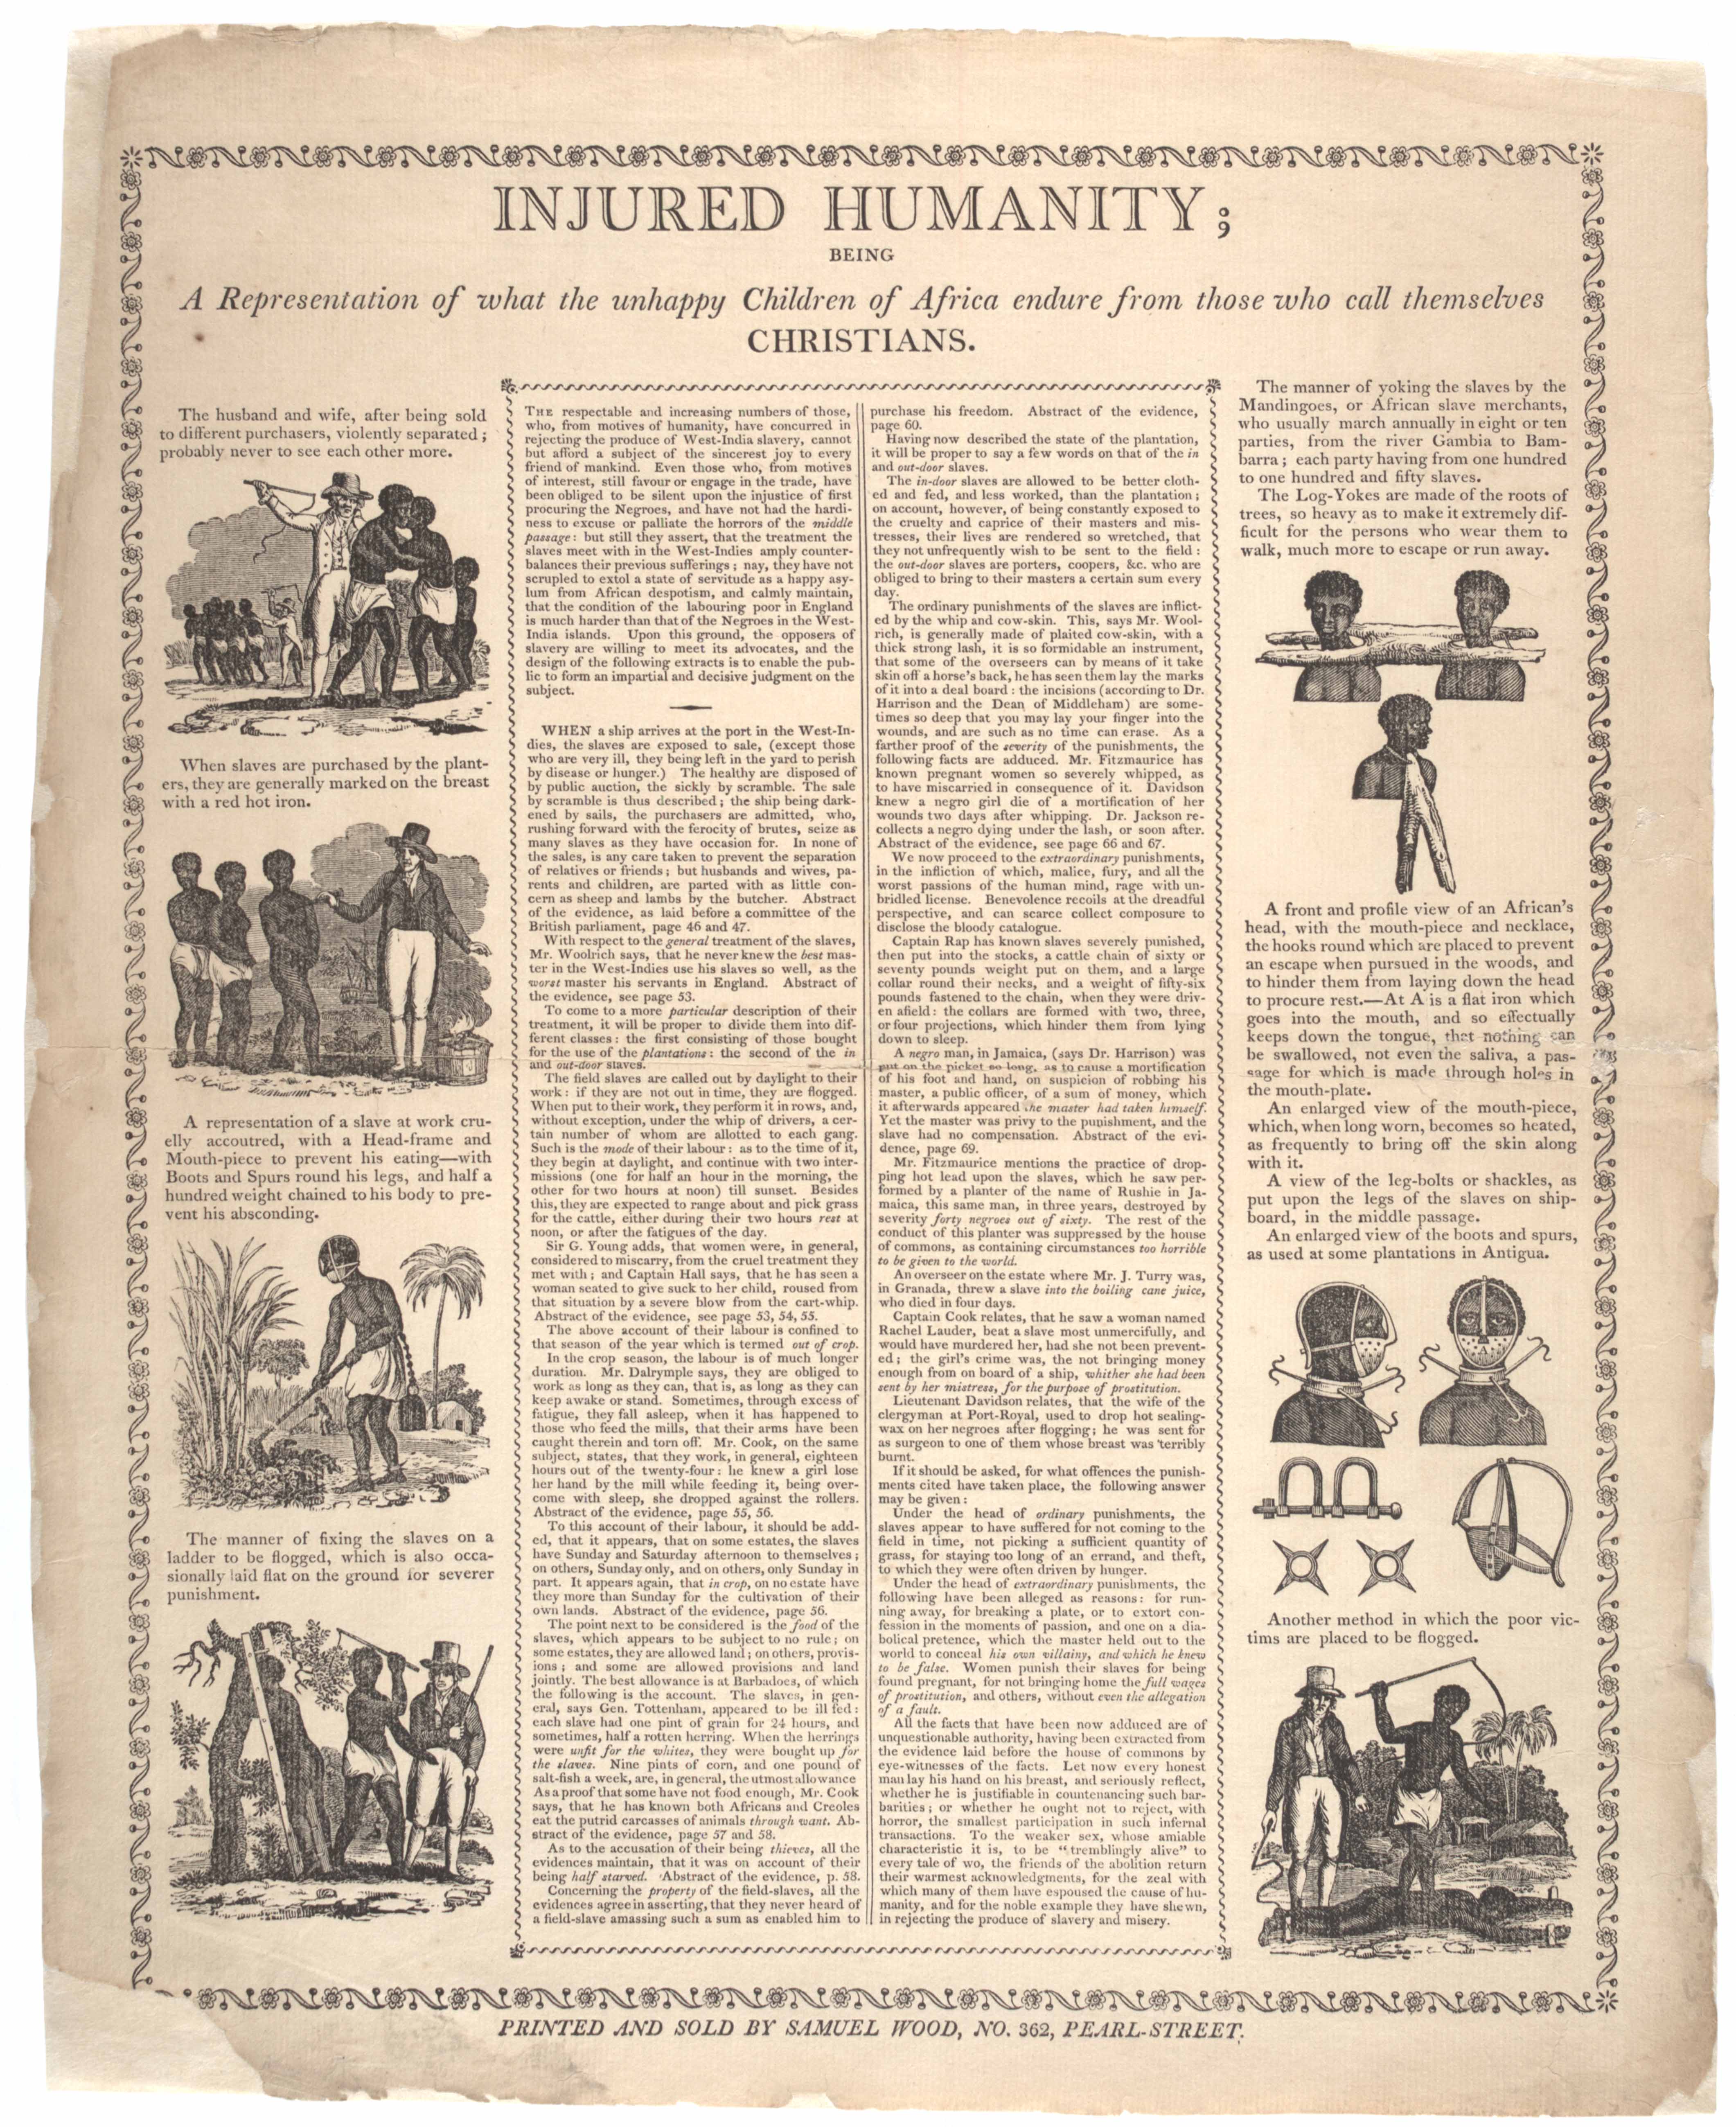 The horrors of slavery, 1805  Gilder Lehrman Institute of American History